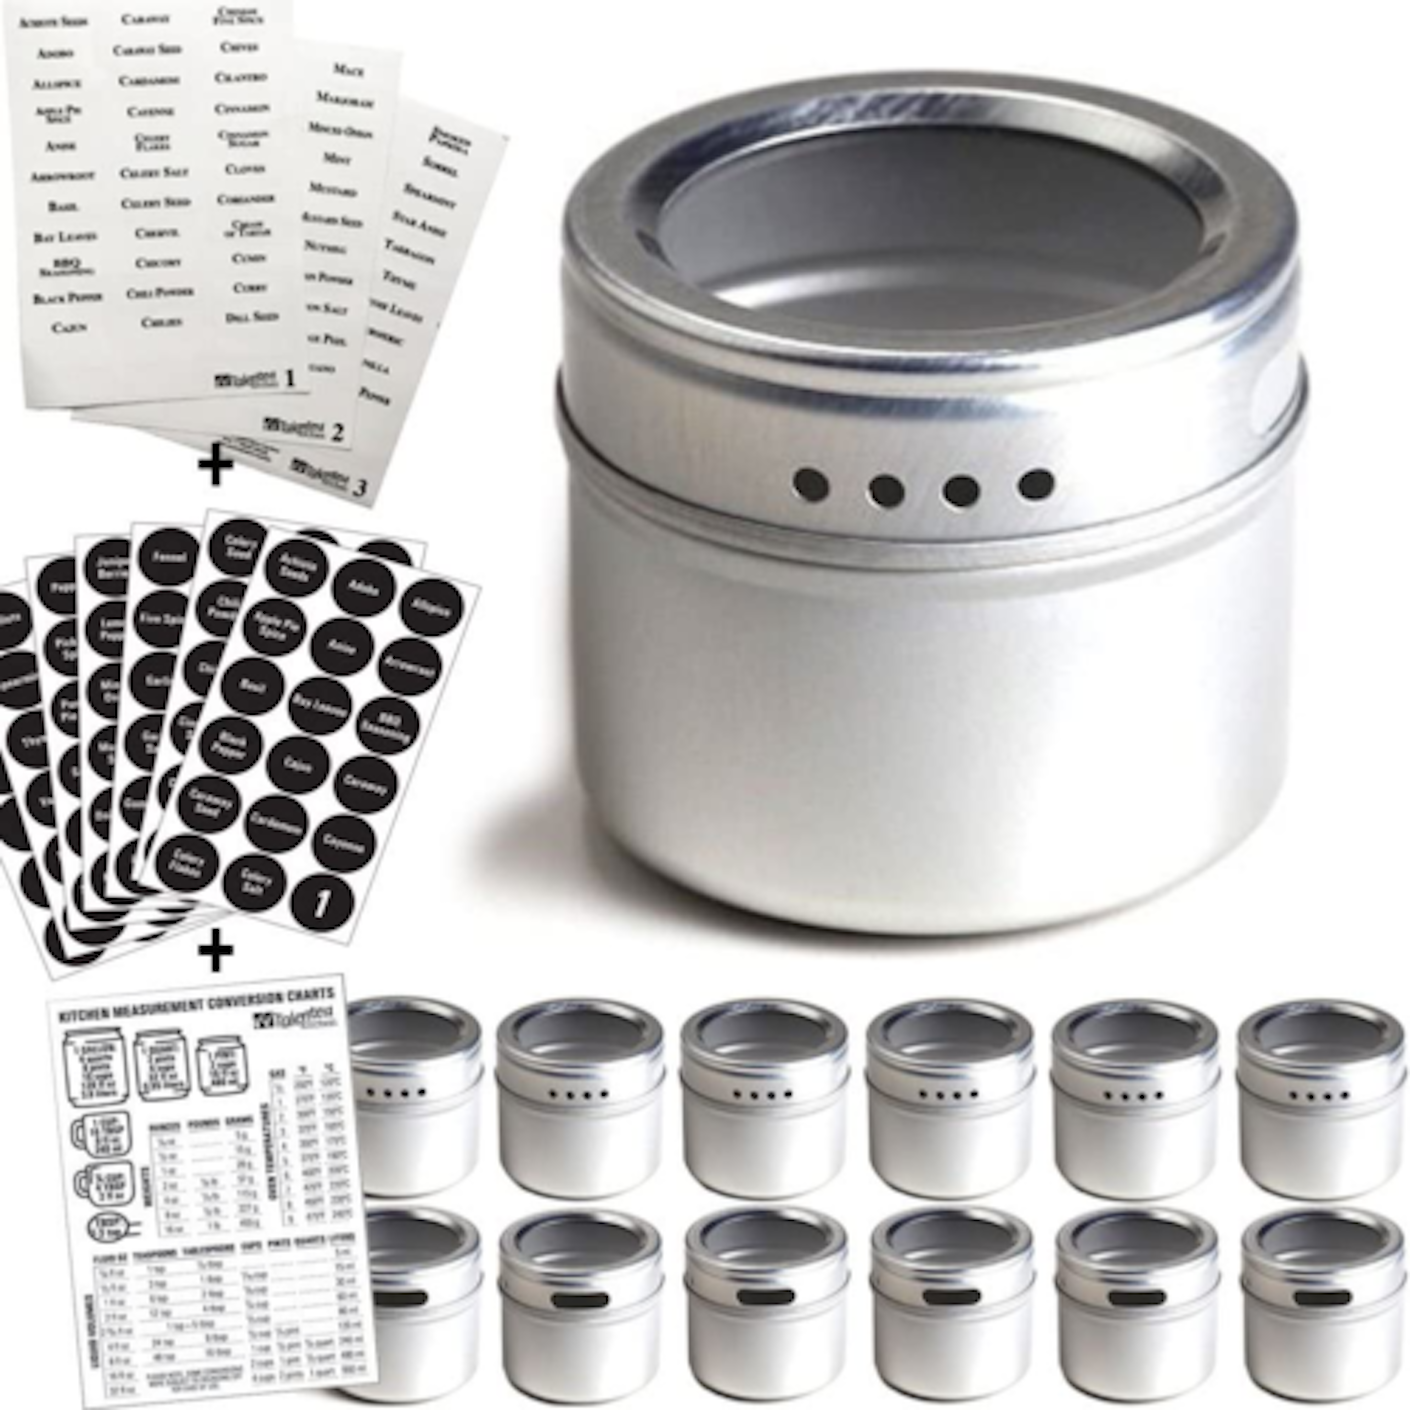 A set of cylindrical silver food containers pictured in front of a white background.